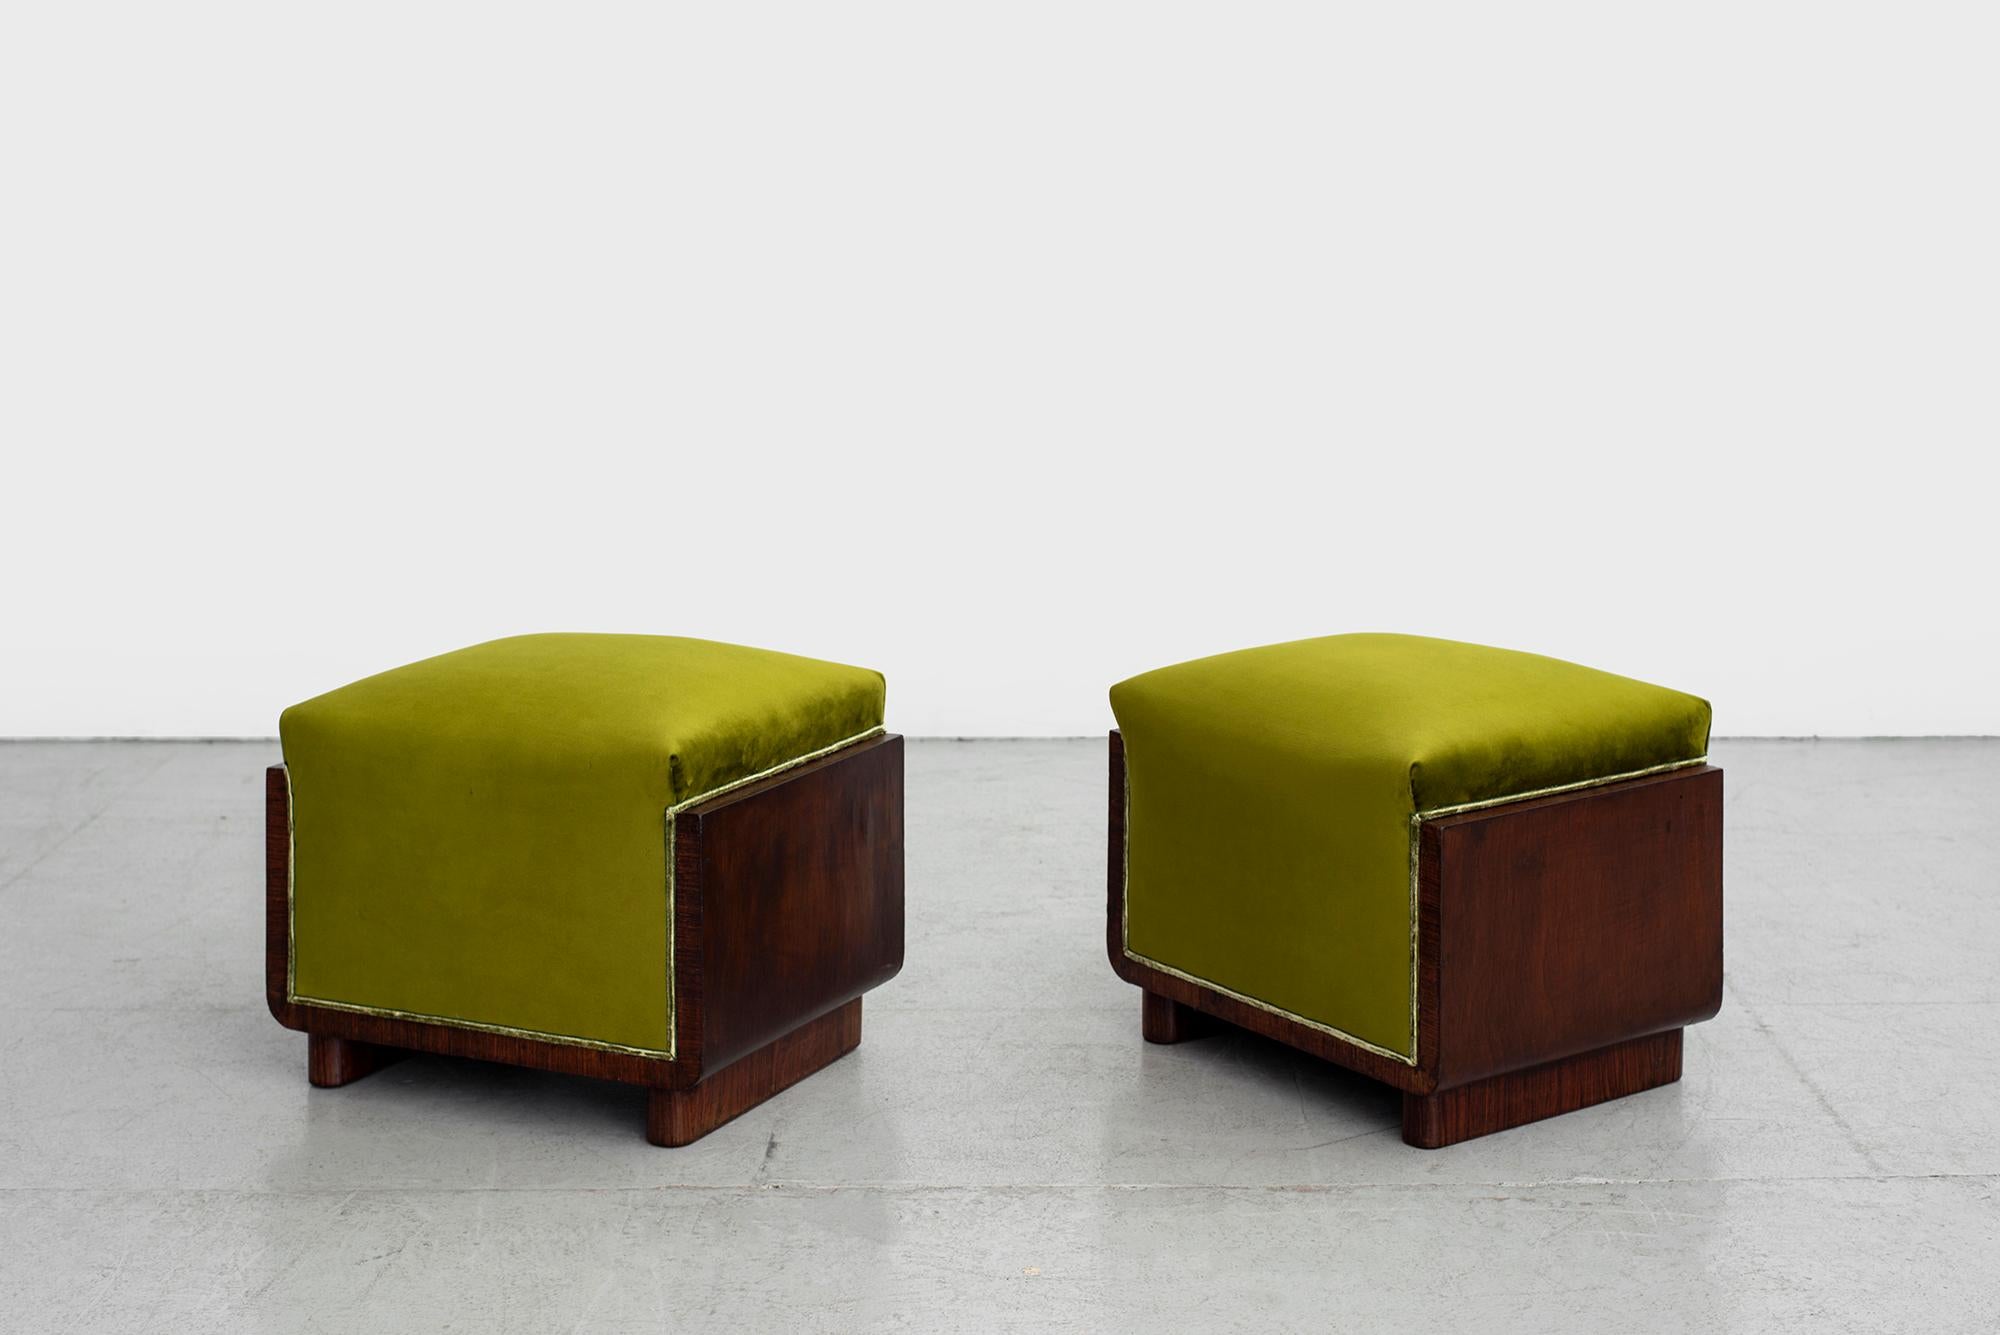 Pair of charming 1940s Italian stools with mahogany frame and cube shape. 
Upholstered in chartreuse green velvet.